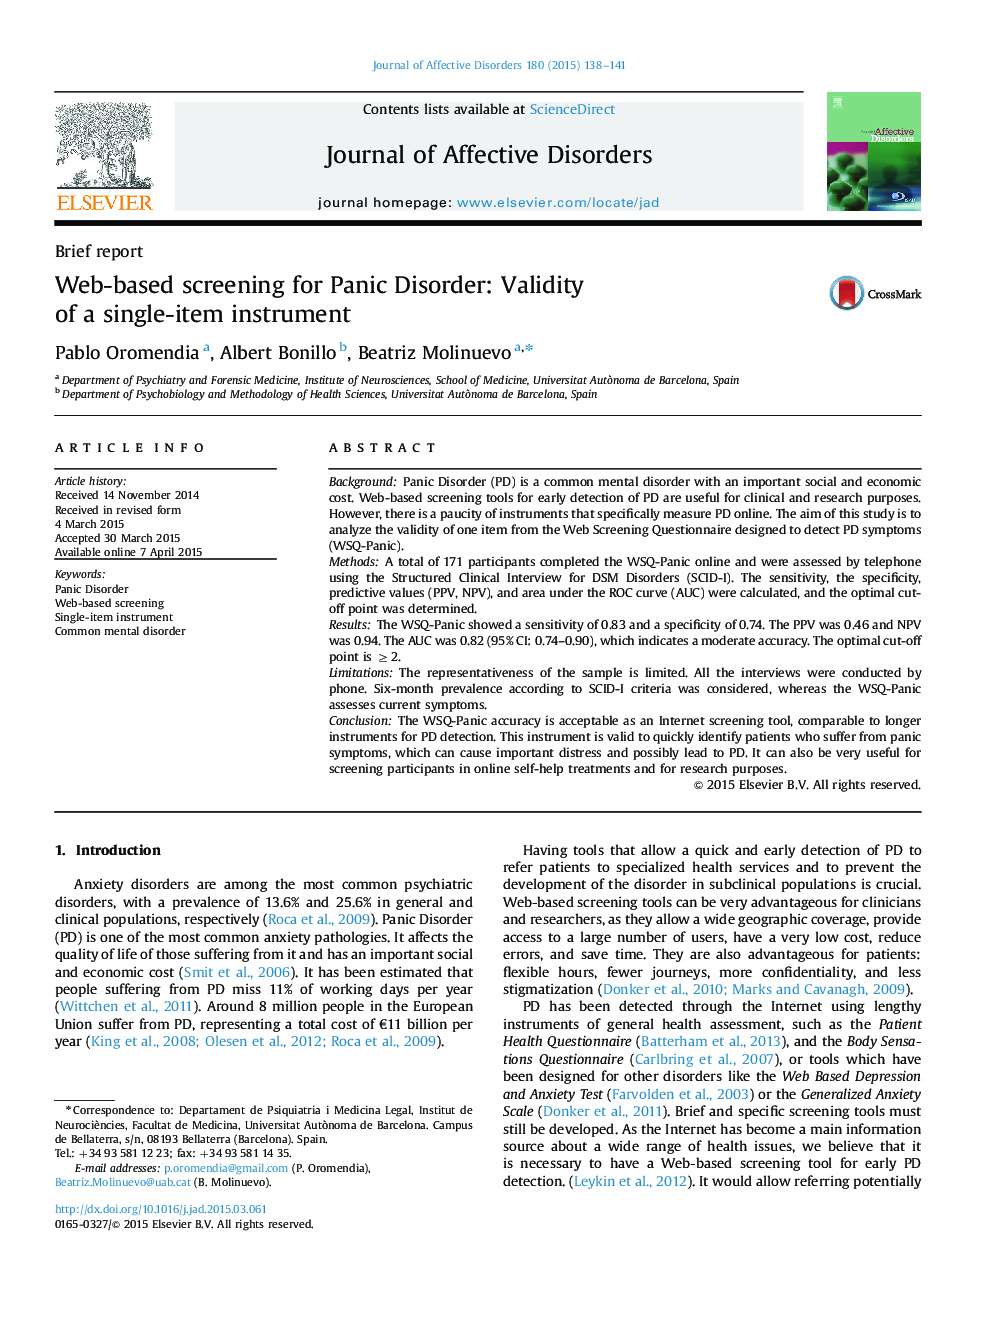 Web-based screening for Panic Disorder: Validity of a single-item instrument